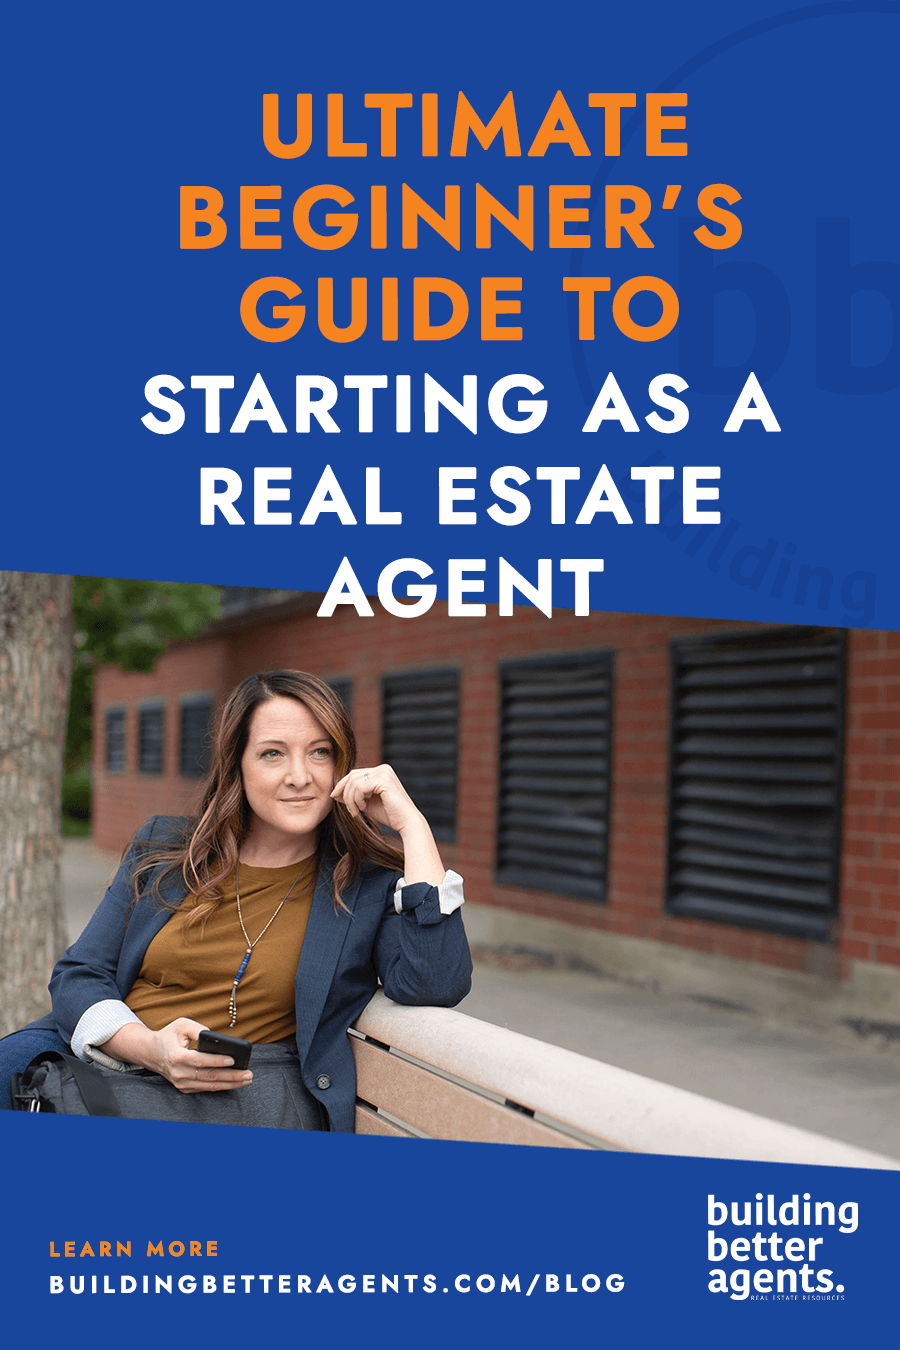 Ultimate Beginner's Guide to Starting as a Real Estate Agent